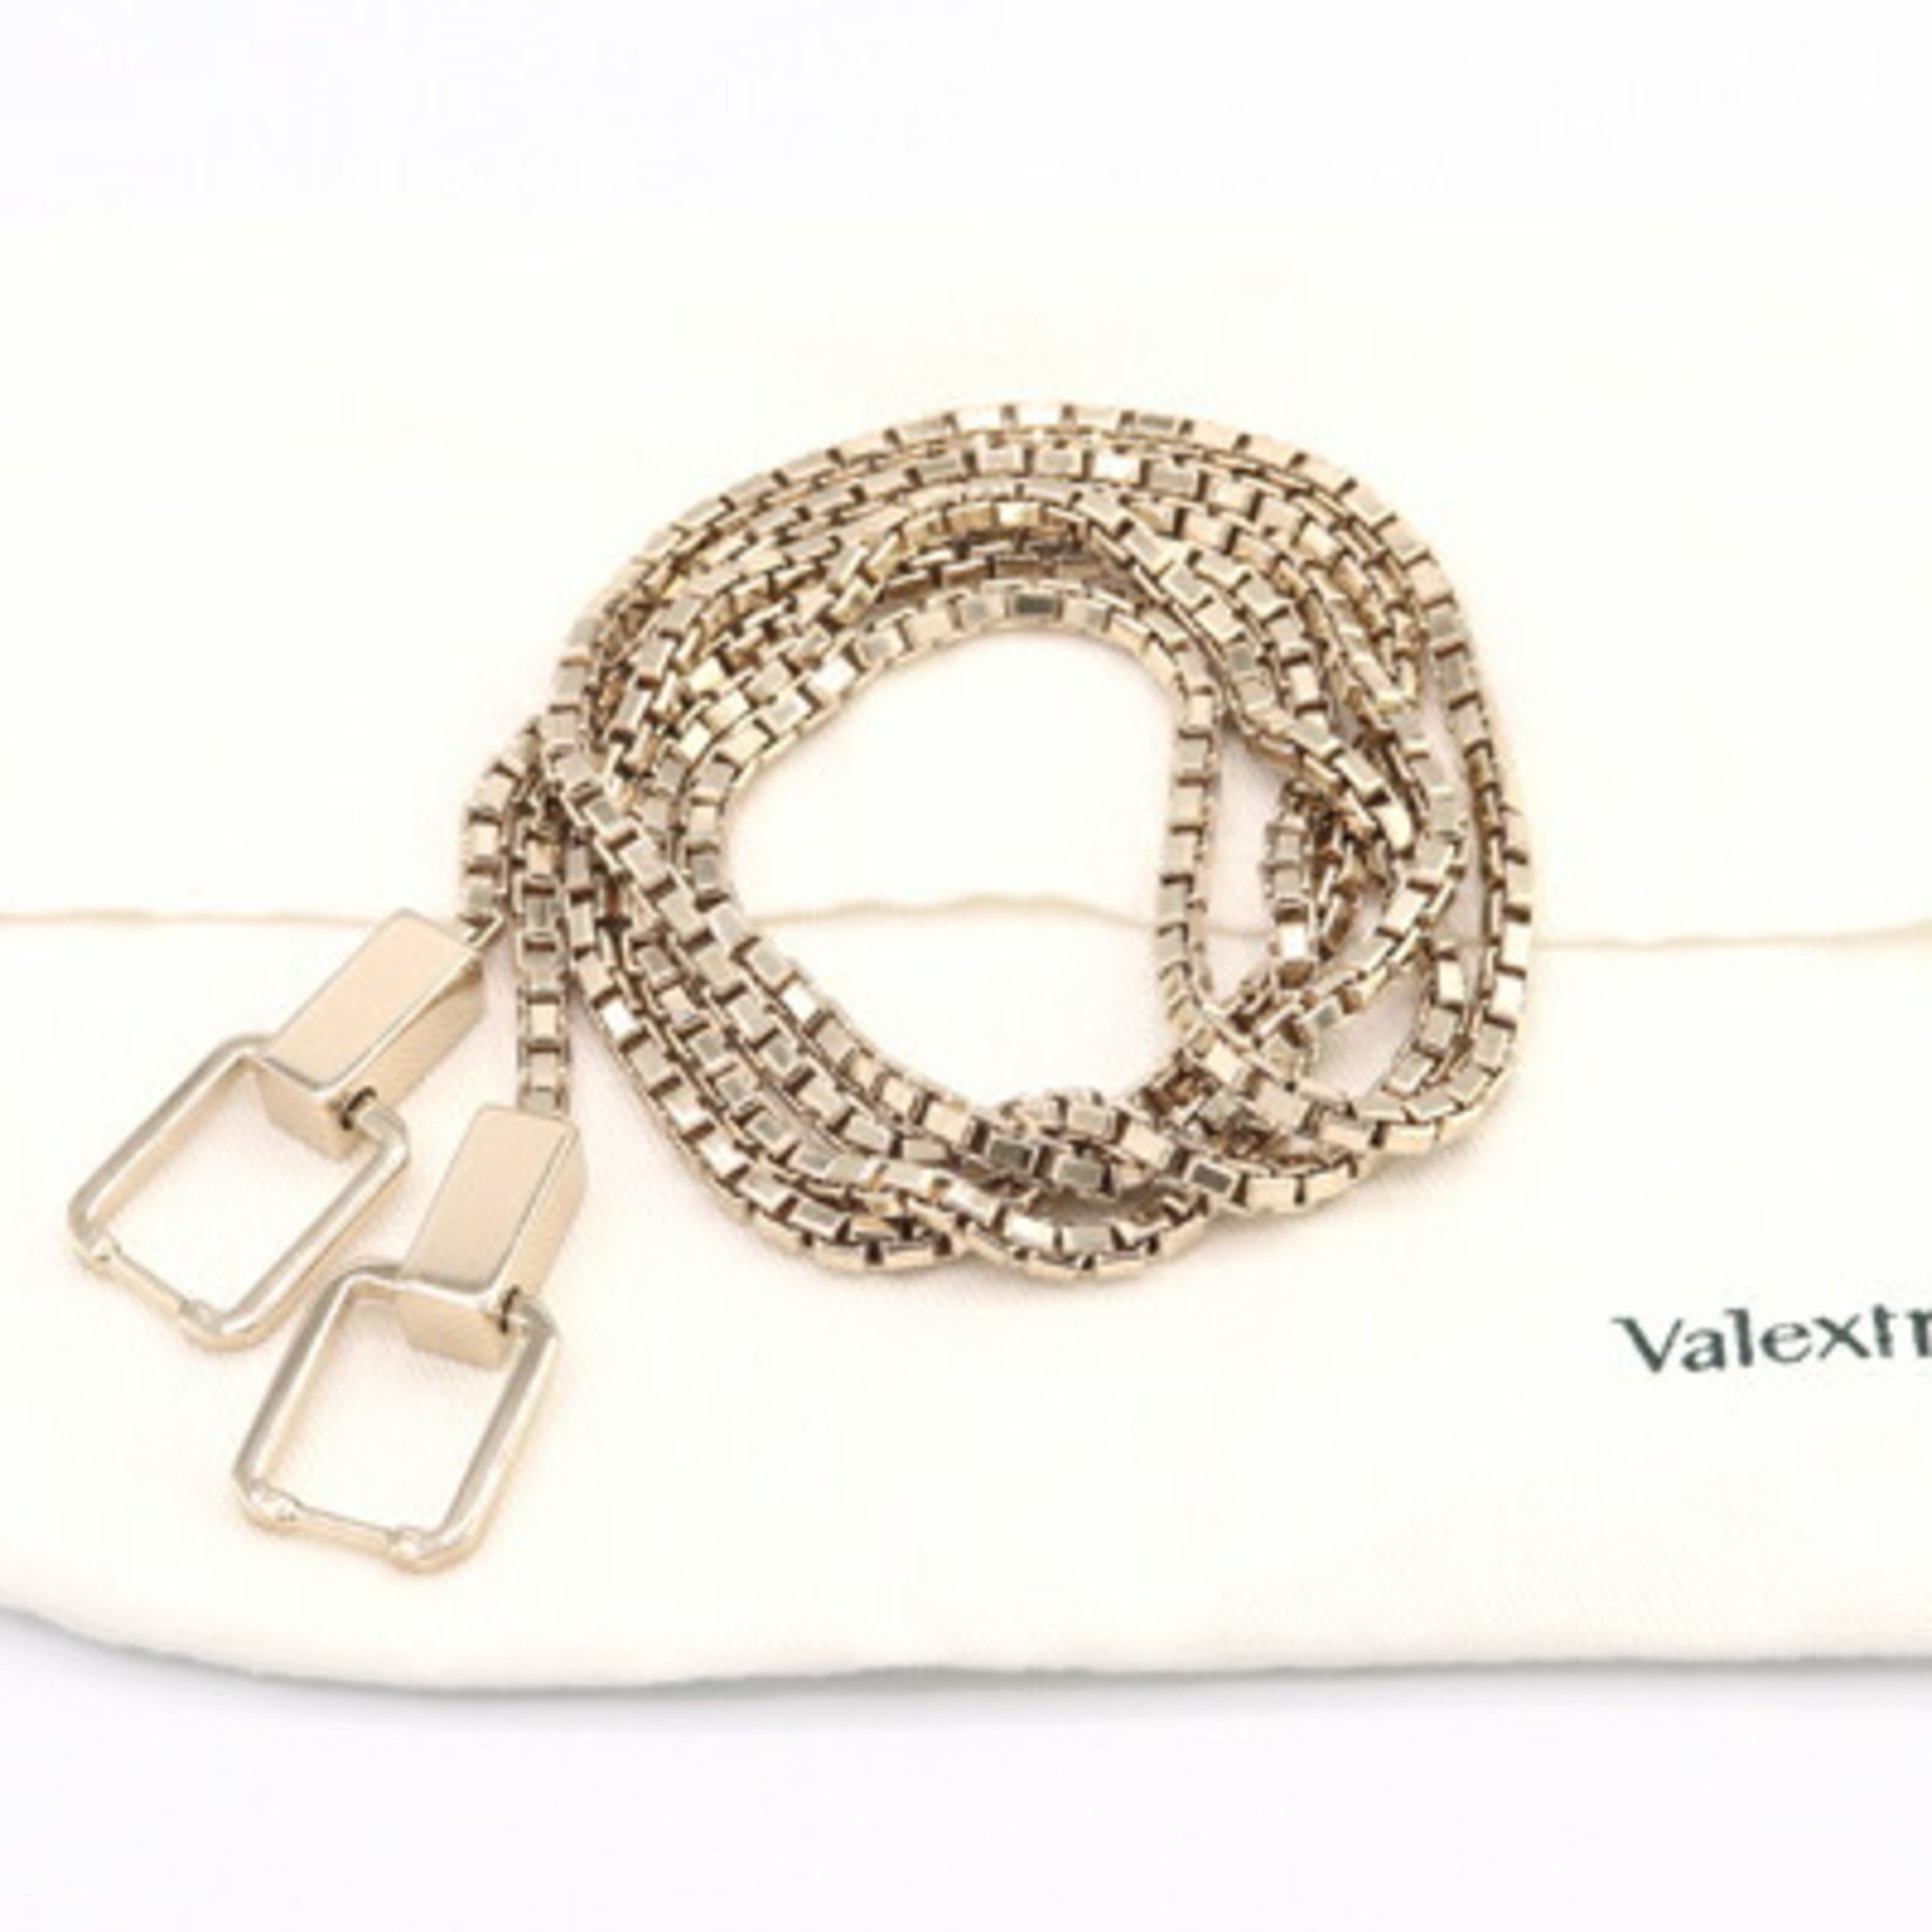 Valextra Chain Shoulder Strap for Iside Gold Metal Venetian Replacement Women VALEXTRA